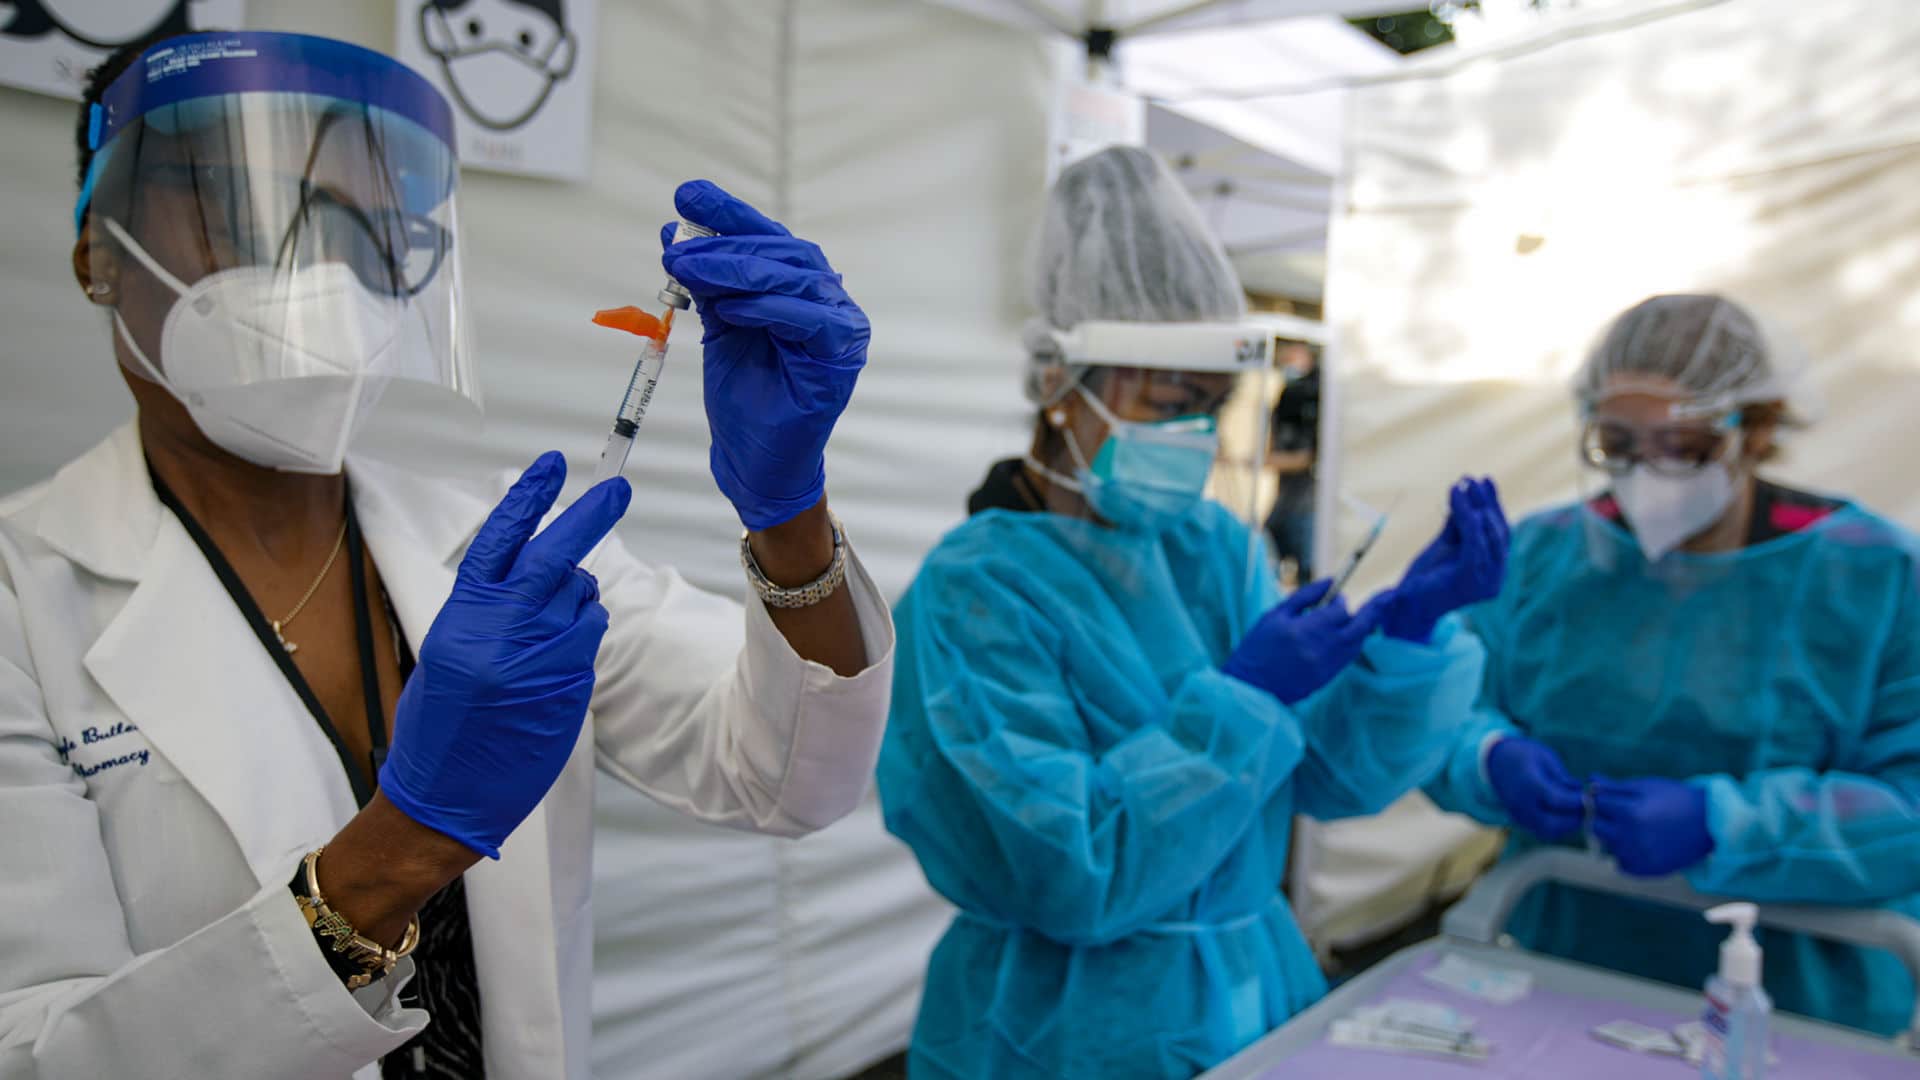 Health care workers prepare the Pfizer-BioNTech Covid-19 vaccine in Los Angeles this January.